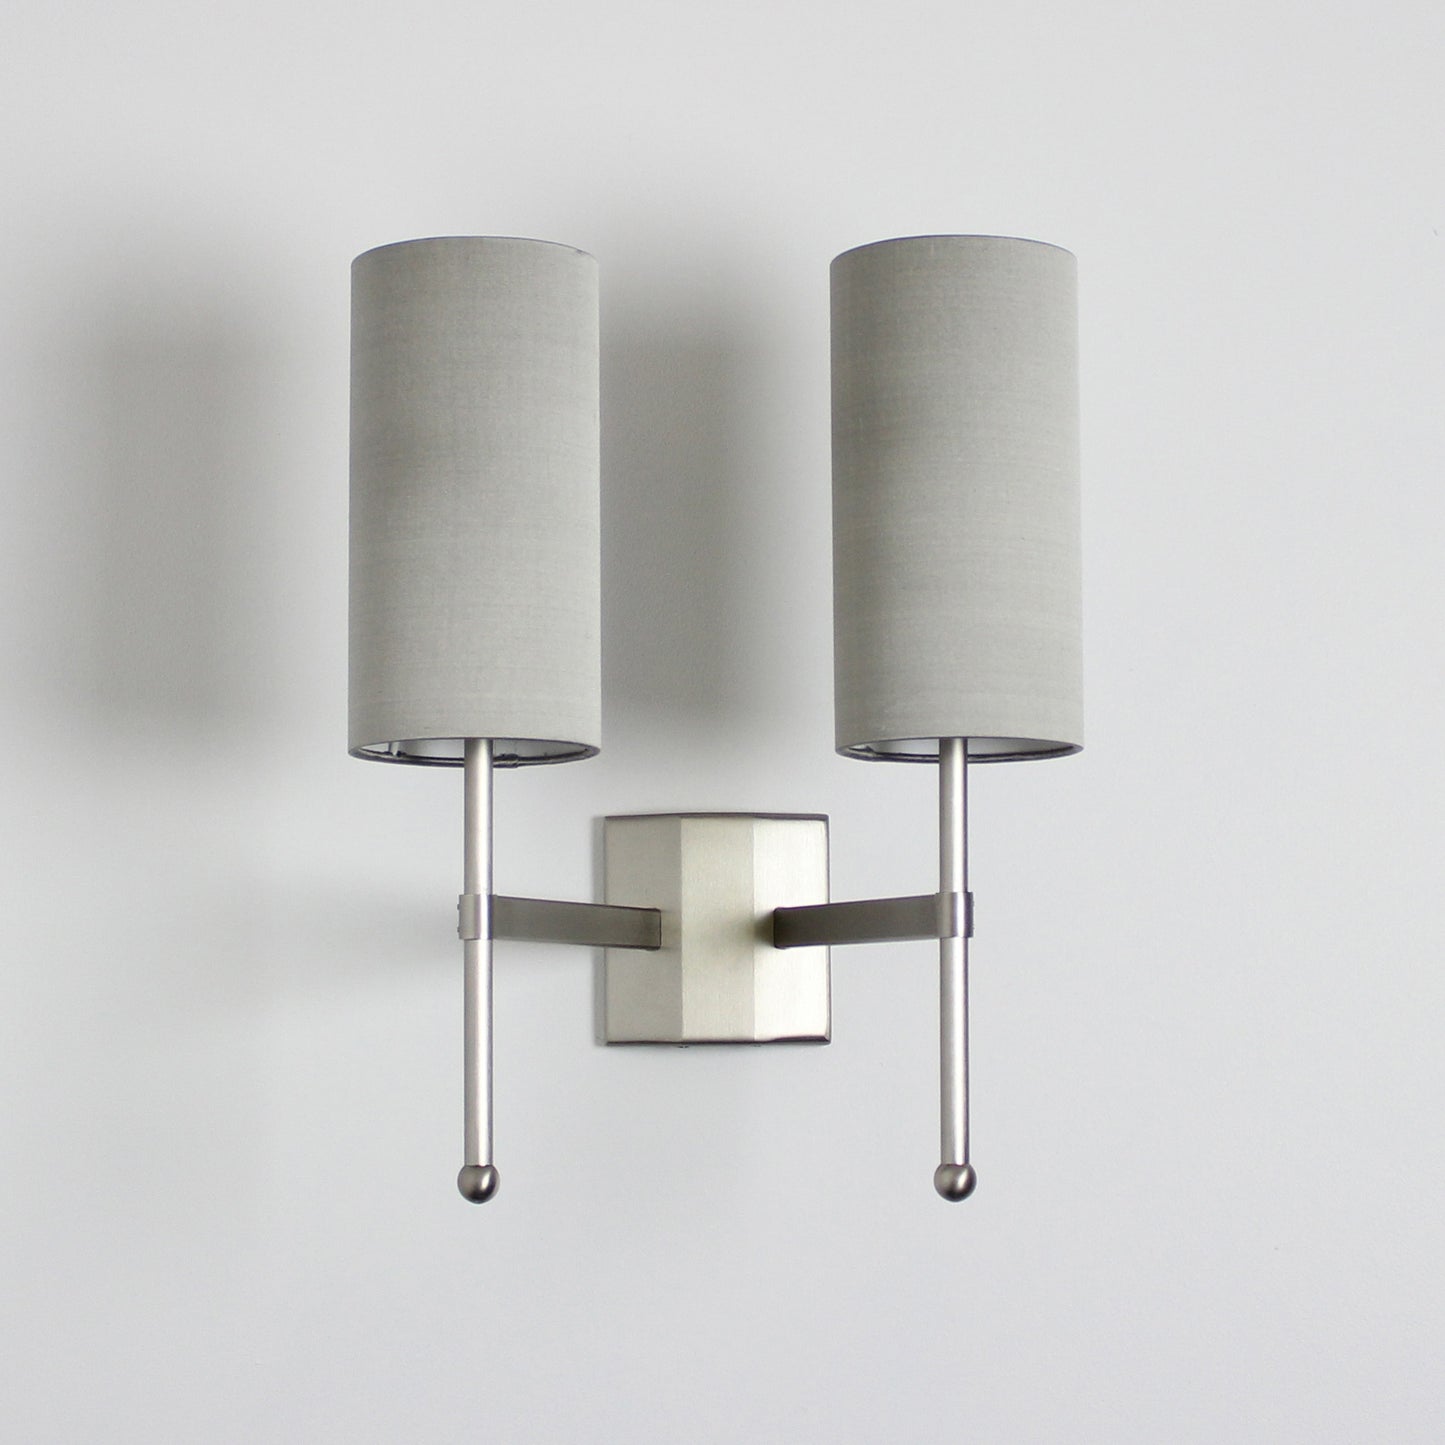 Imperfect Double Stem Wall Light in Flat Nickel with Birch Silk Shades - 693, 623